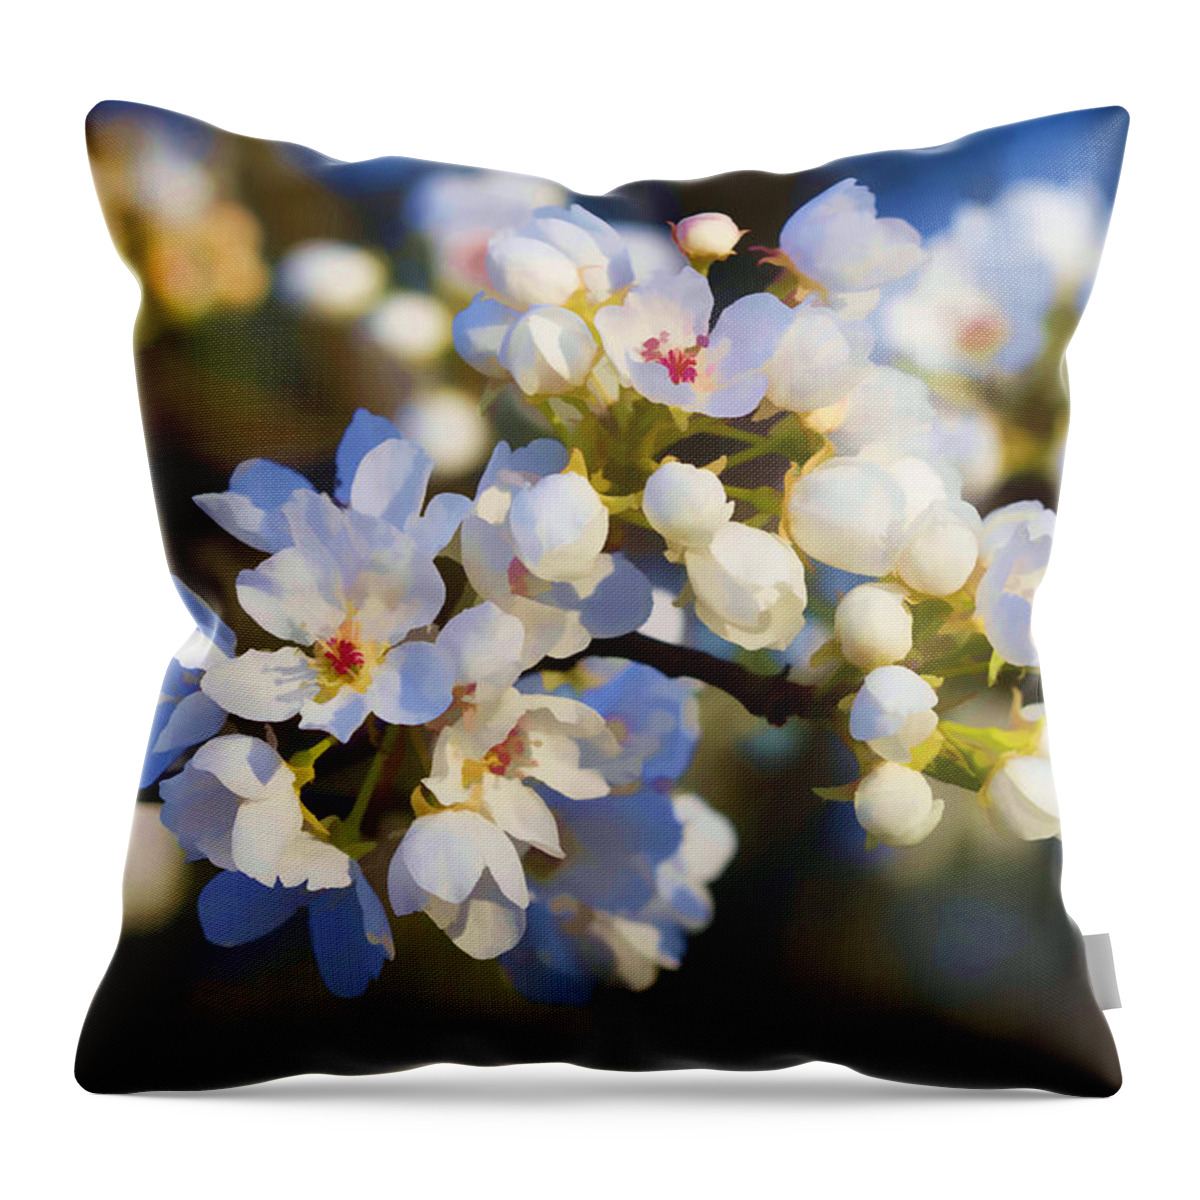 Bradford Throw Pillow featuring the photograph Glorious Light by Kathy Clark